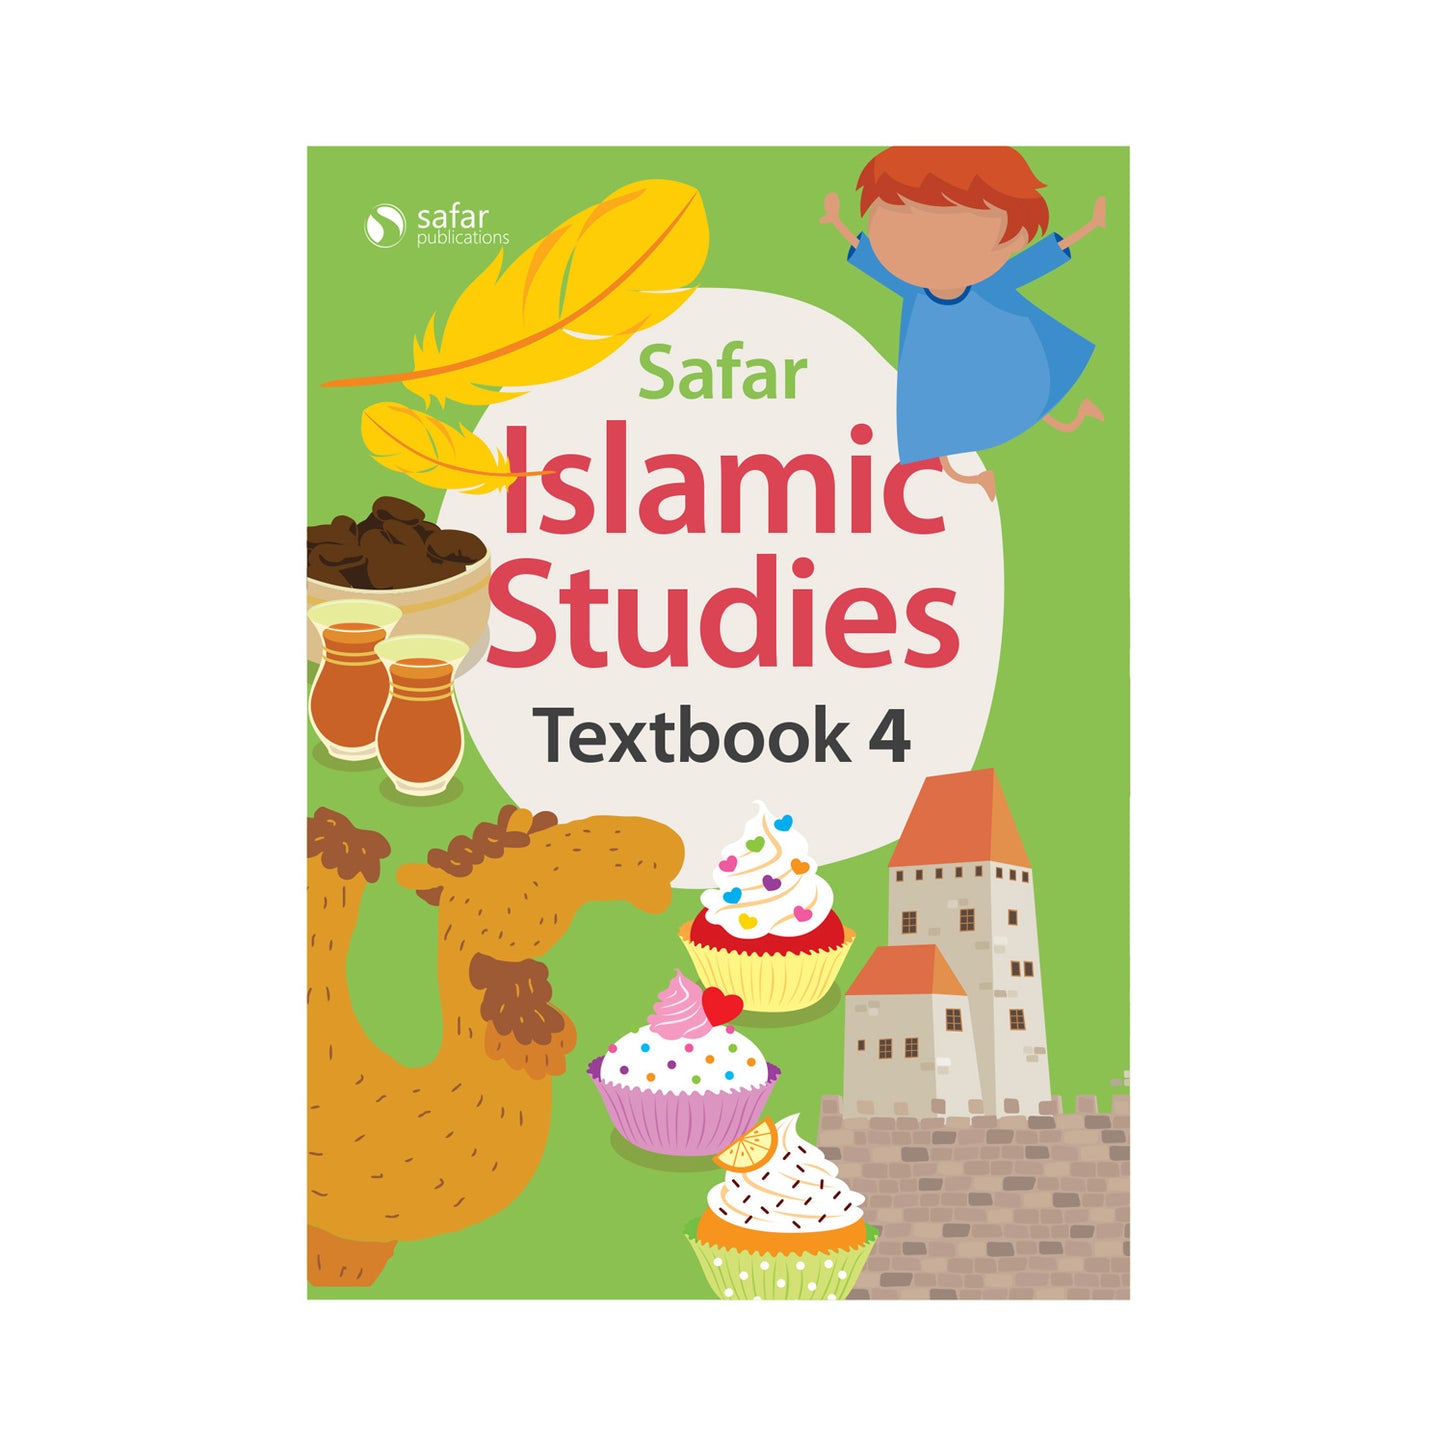 Islamic Studies: Textbook 4 – Learn about Islam Series by Safar